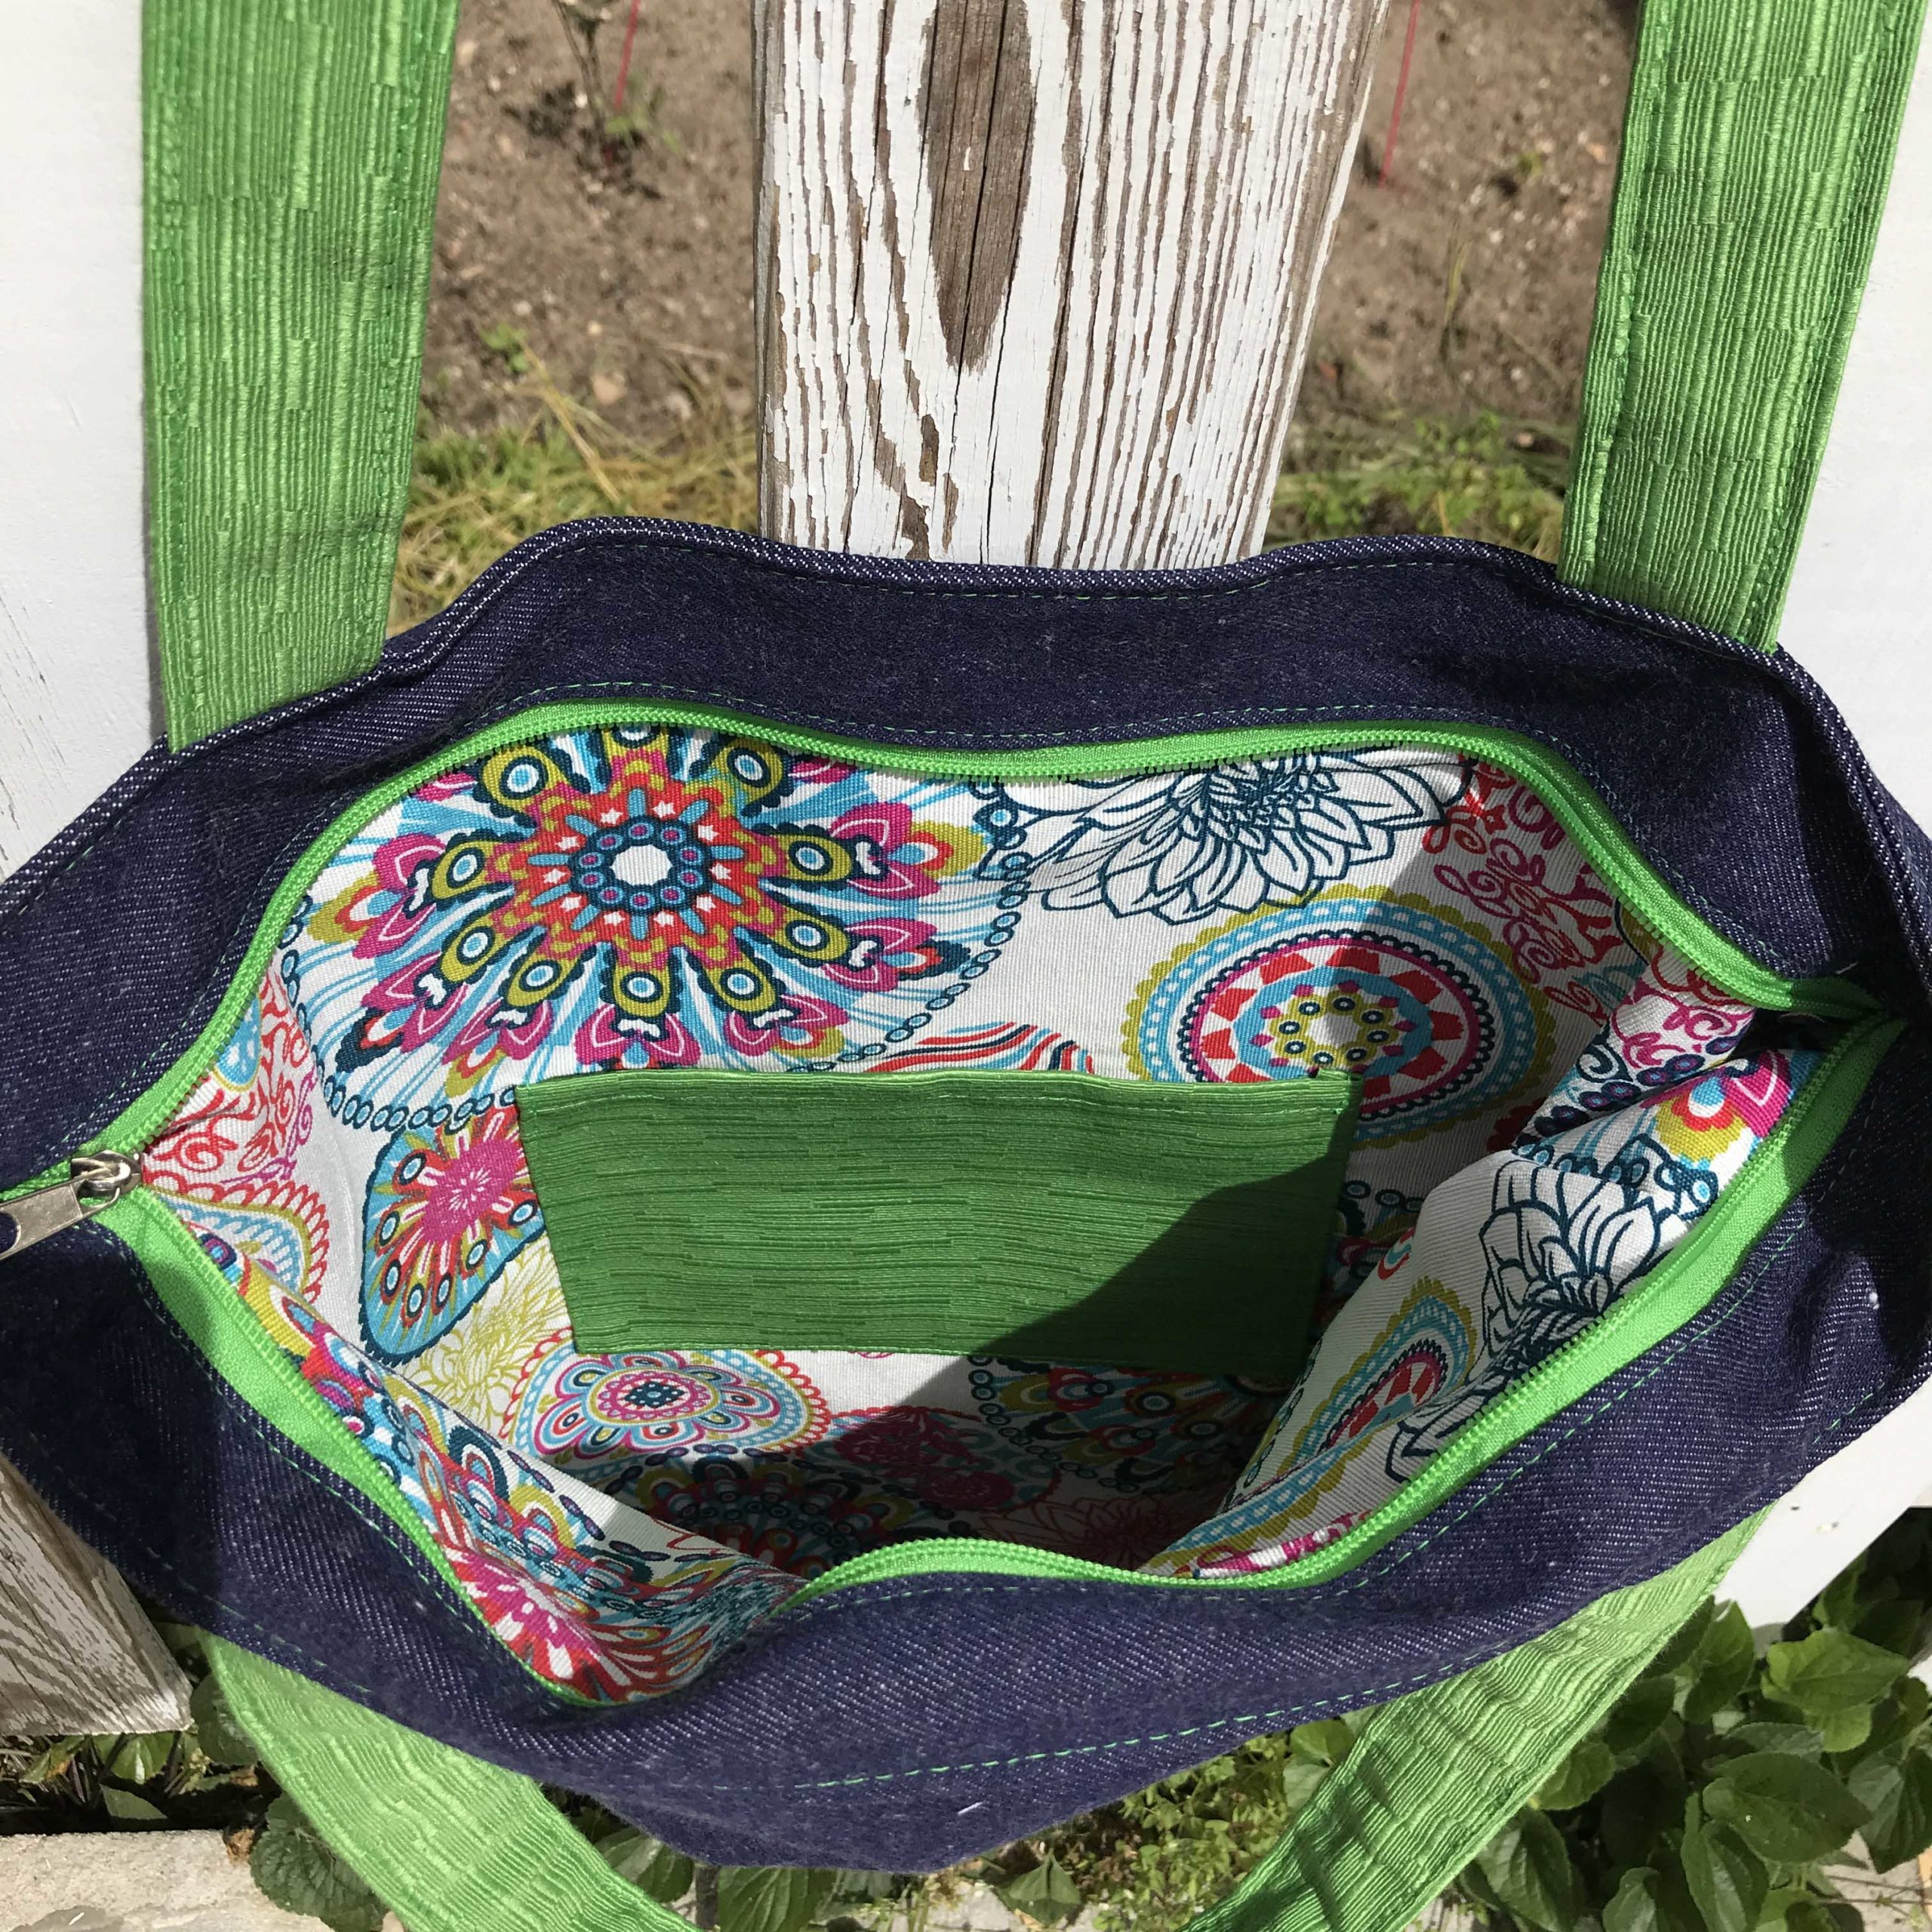 How To Sew A Tote Bag With A Flat Bottom?